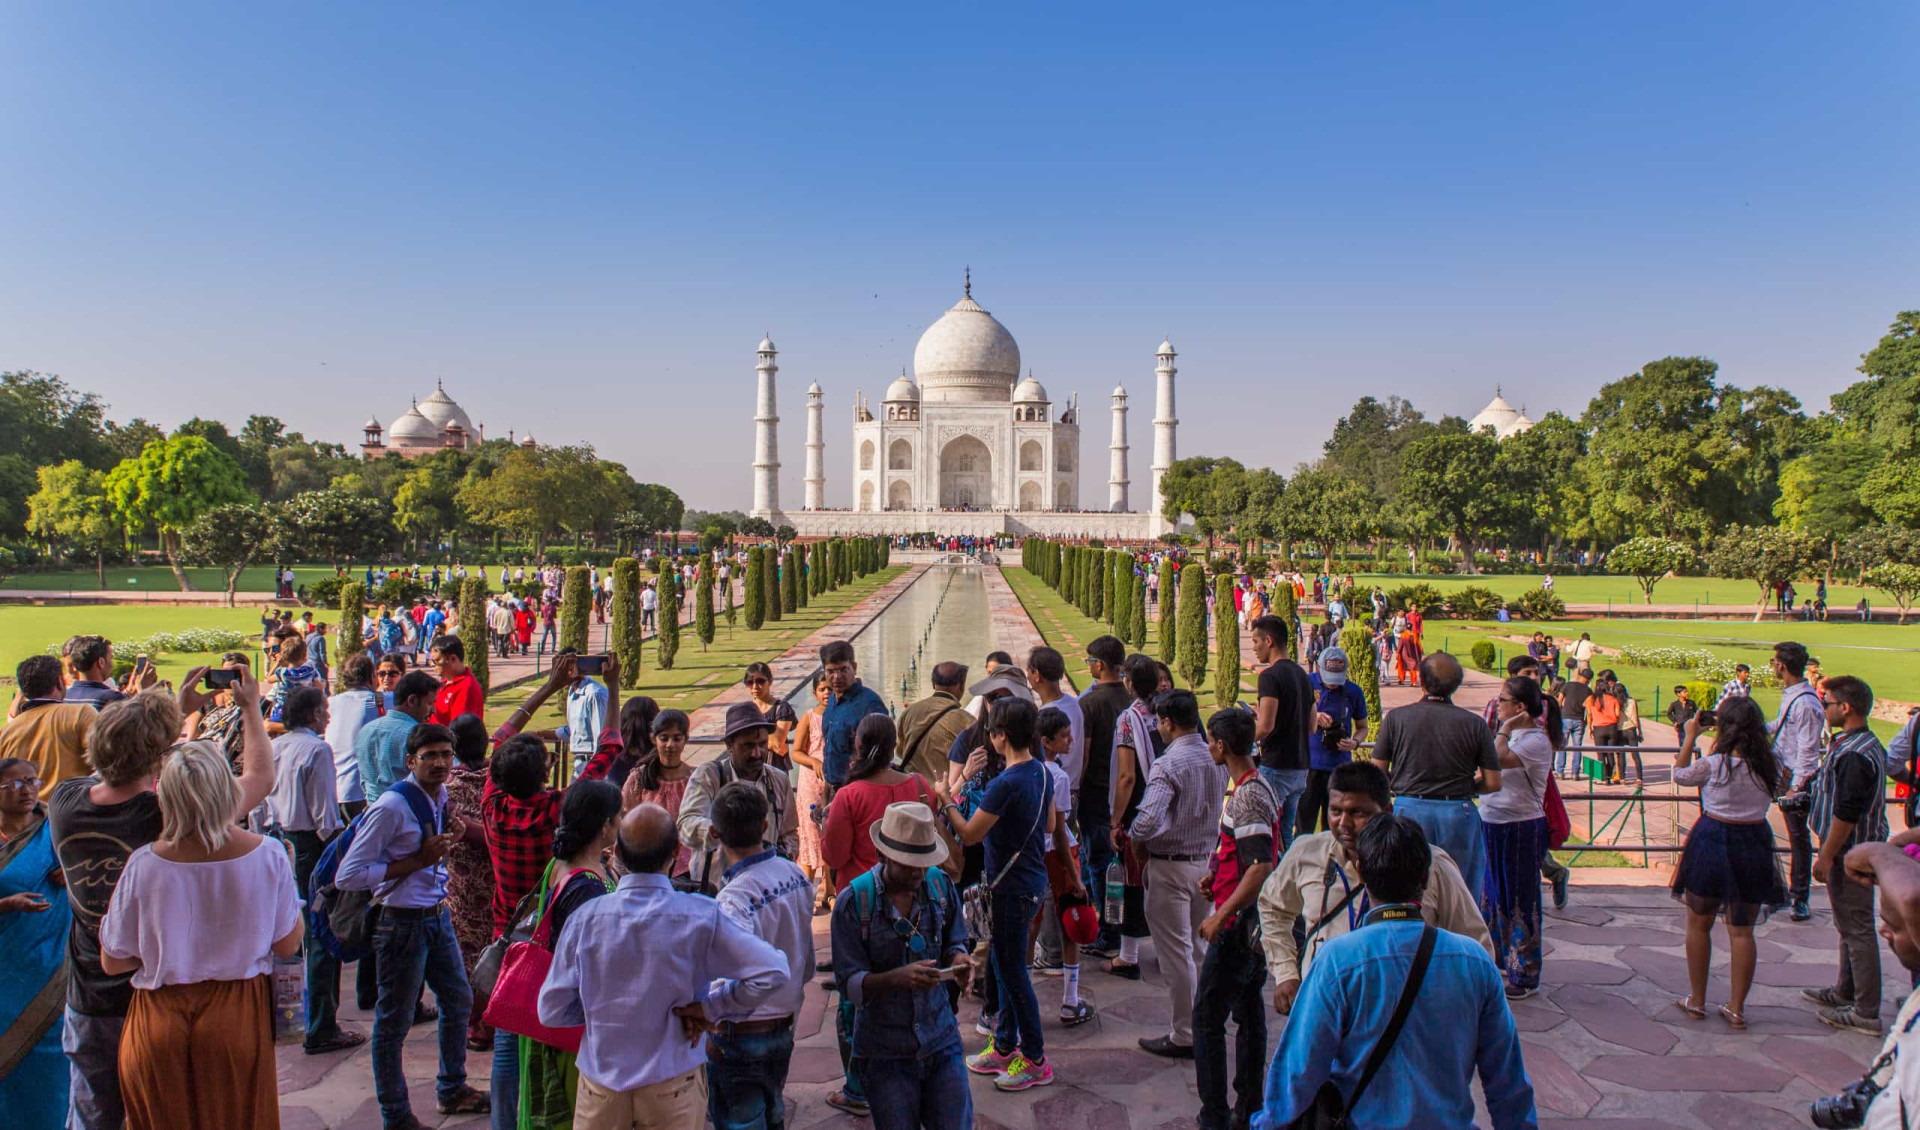 <p>A three-hour time limit is imposed on tourists visiting the Taj Mahal. This is in a bid to reduce the estimated 70,000 people a day that congregate in and around the 17th-century mausoleum complex. In 2018, visitor numbers were capped further to 40,000 a day.</p><p><a href="https://www.msn.com/en-my/community/channel/vid-7xx8mnucu55yw63we9va2gwr7uihbxwc68fxqp25x6tg4ftibpra?cvid=94631541bc0f4f89bfd59158d696ad7e">Follow us and access great exclusive content every day</a></p>